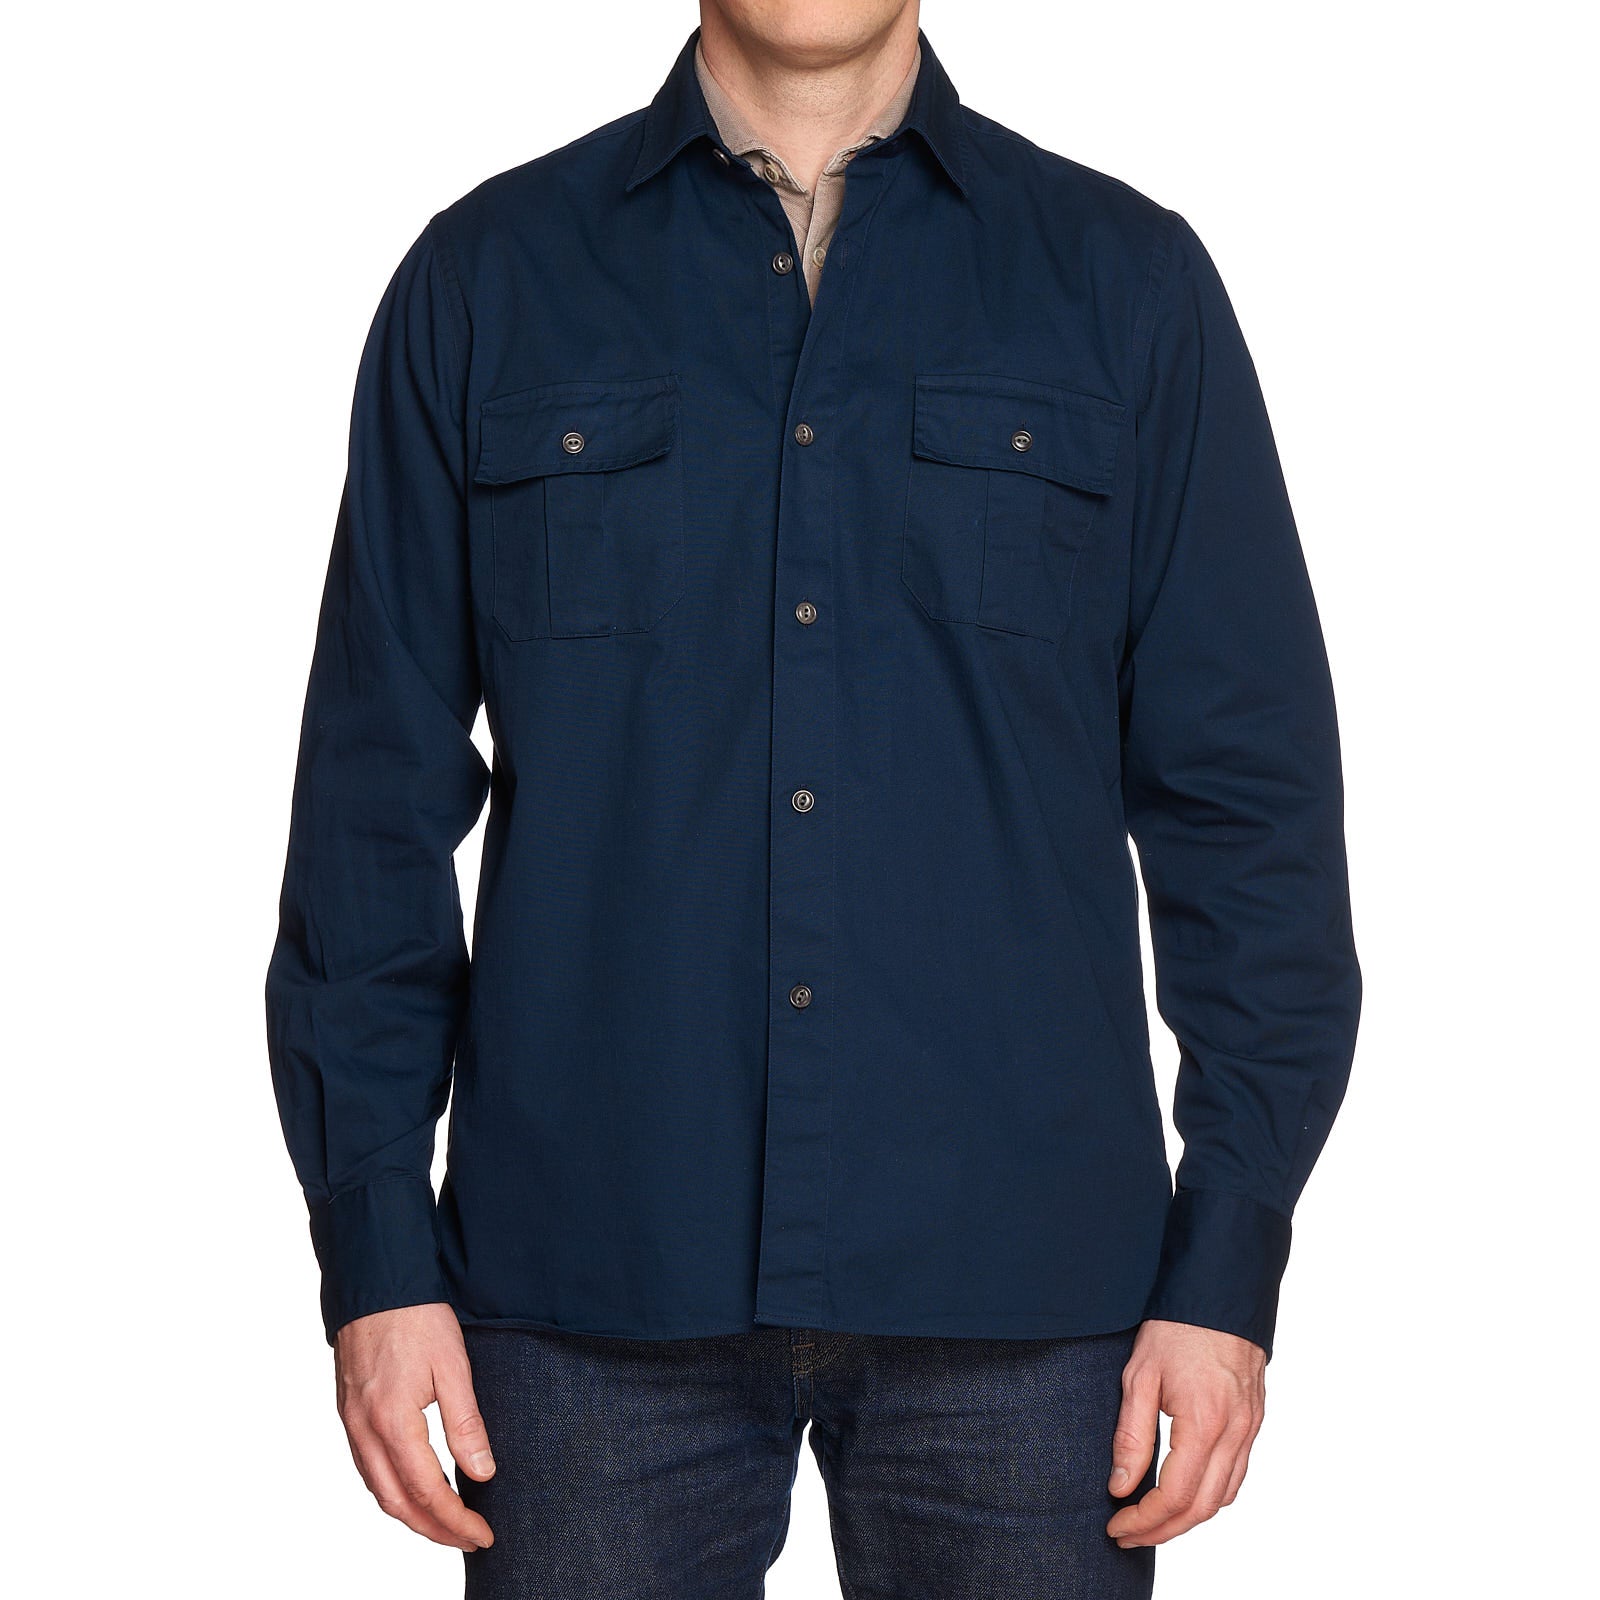 GUY ROVER X FORTELA "Marine" Blue Twill Cotton Casual Overshirt Shirt NEW Size L GUY ROVER X FORTELA